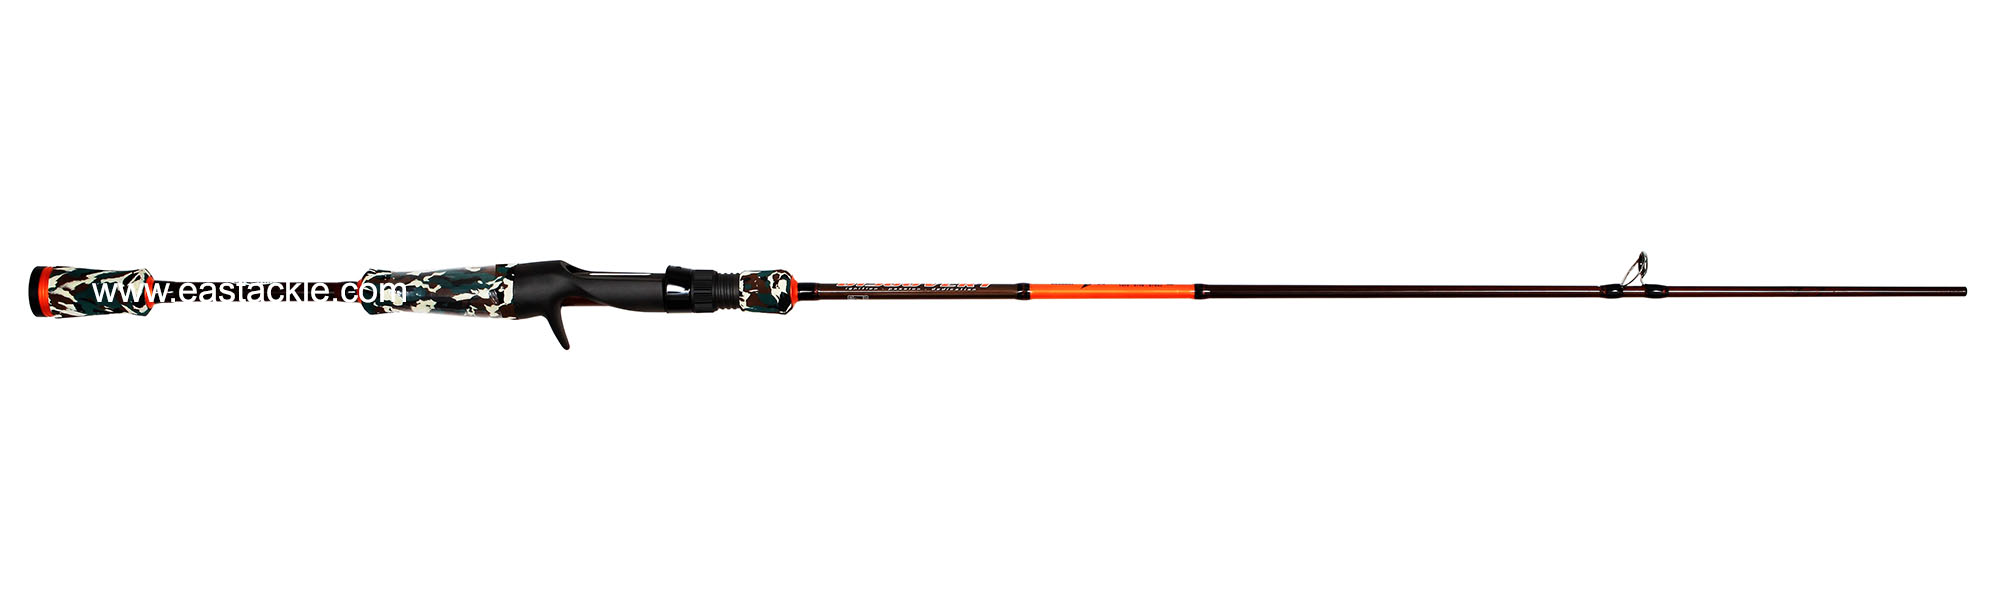 Storm - Discovery - DVC602UL - Bait Casting Rod - Butt to Stripper Guide (Side View) | Eastackle